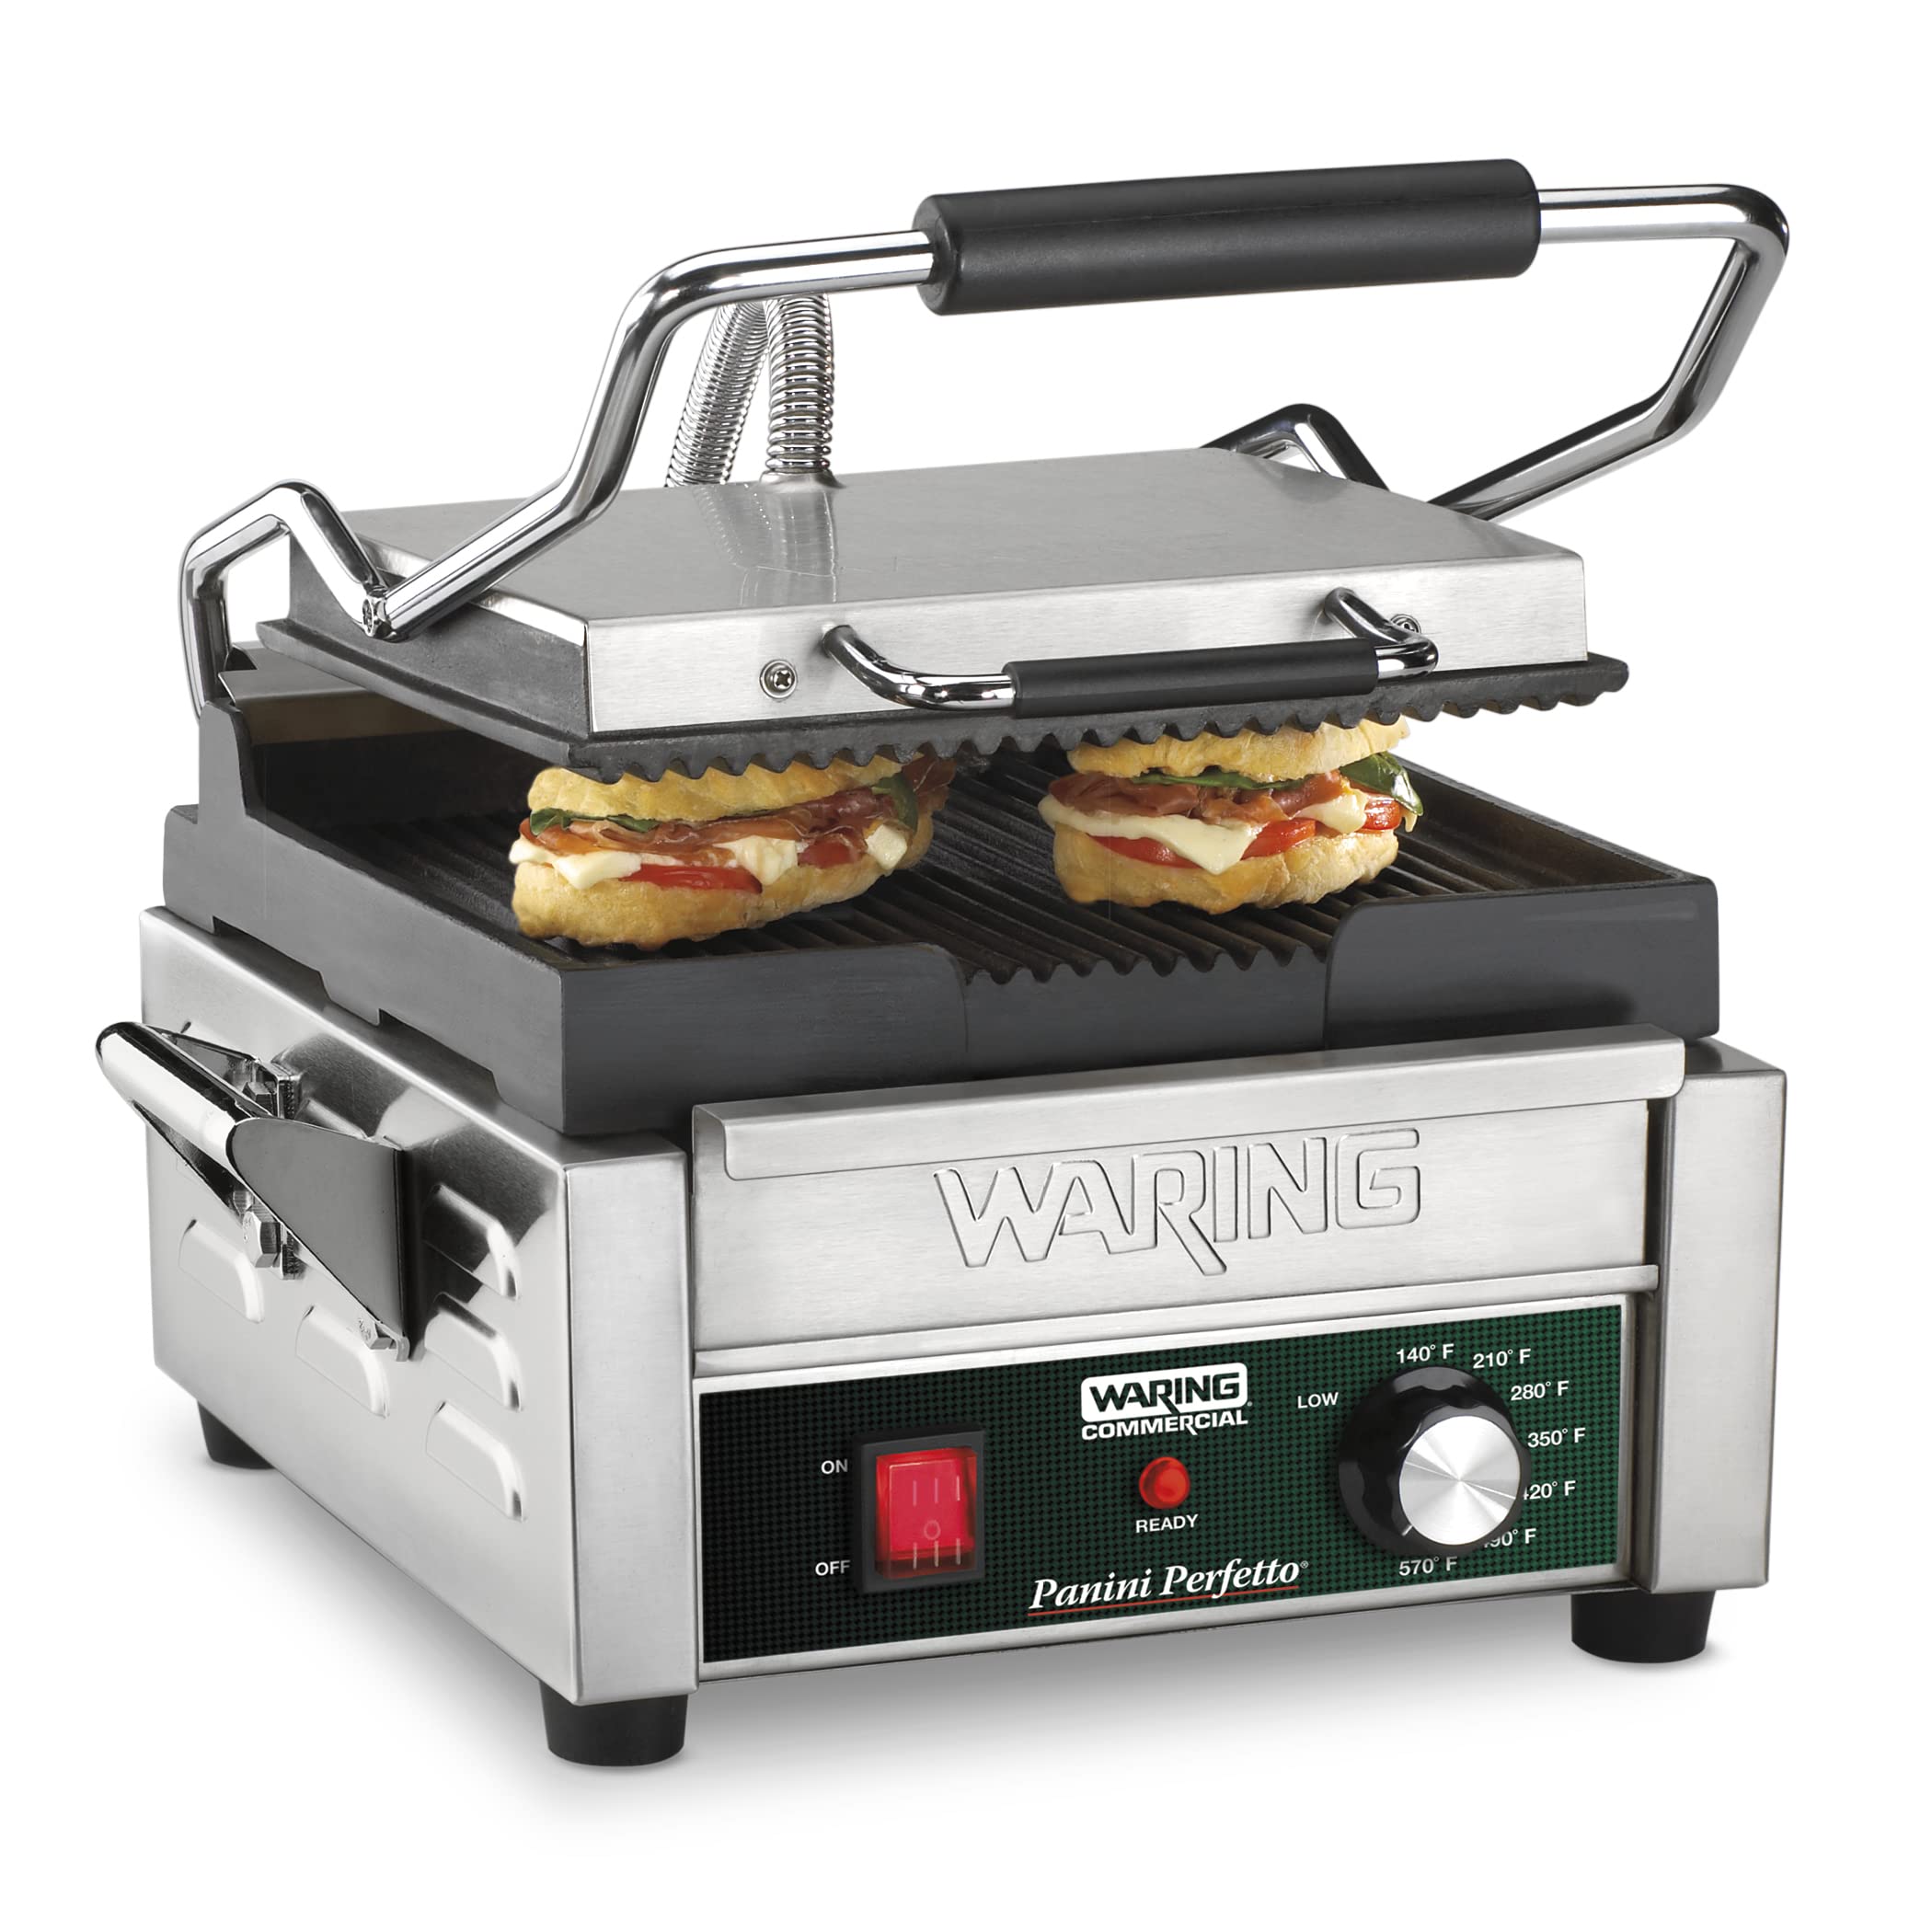 Waring Commercial WPG150 Compact Italian-Style Panini Grill